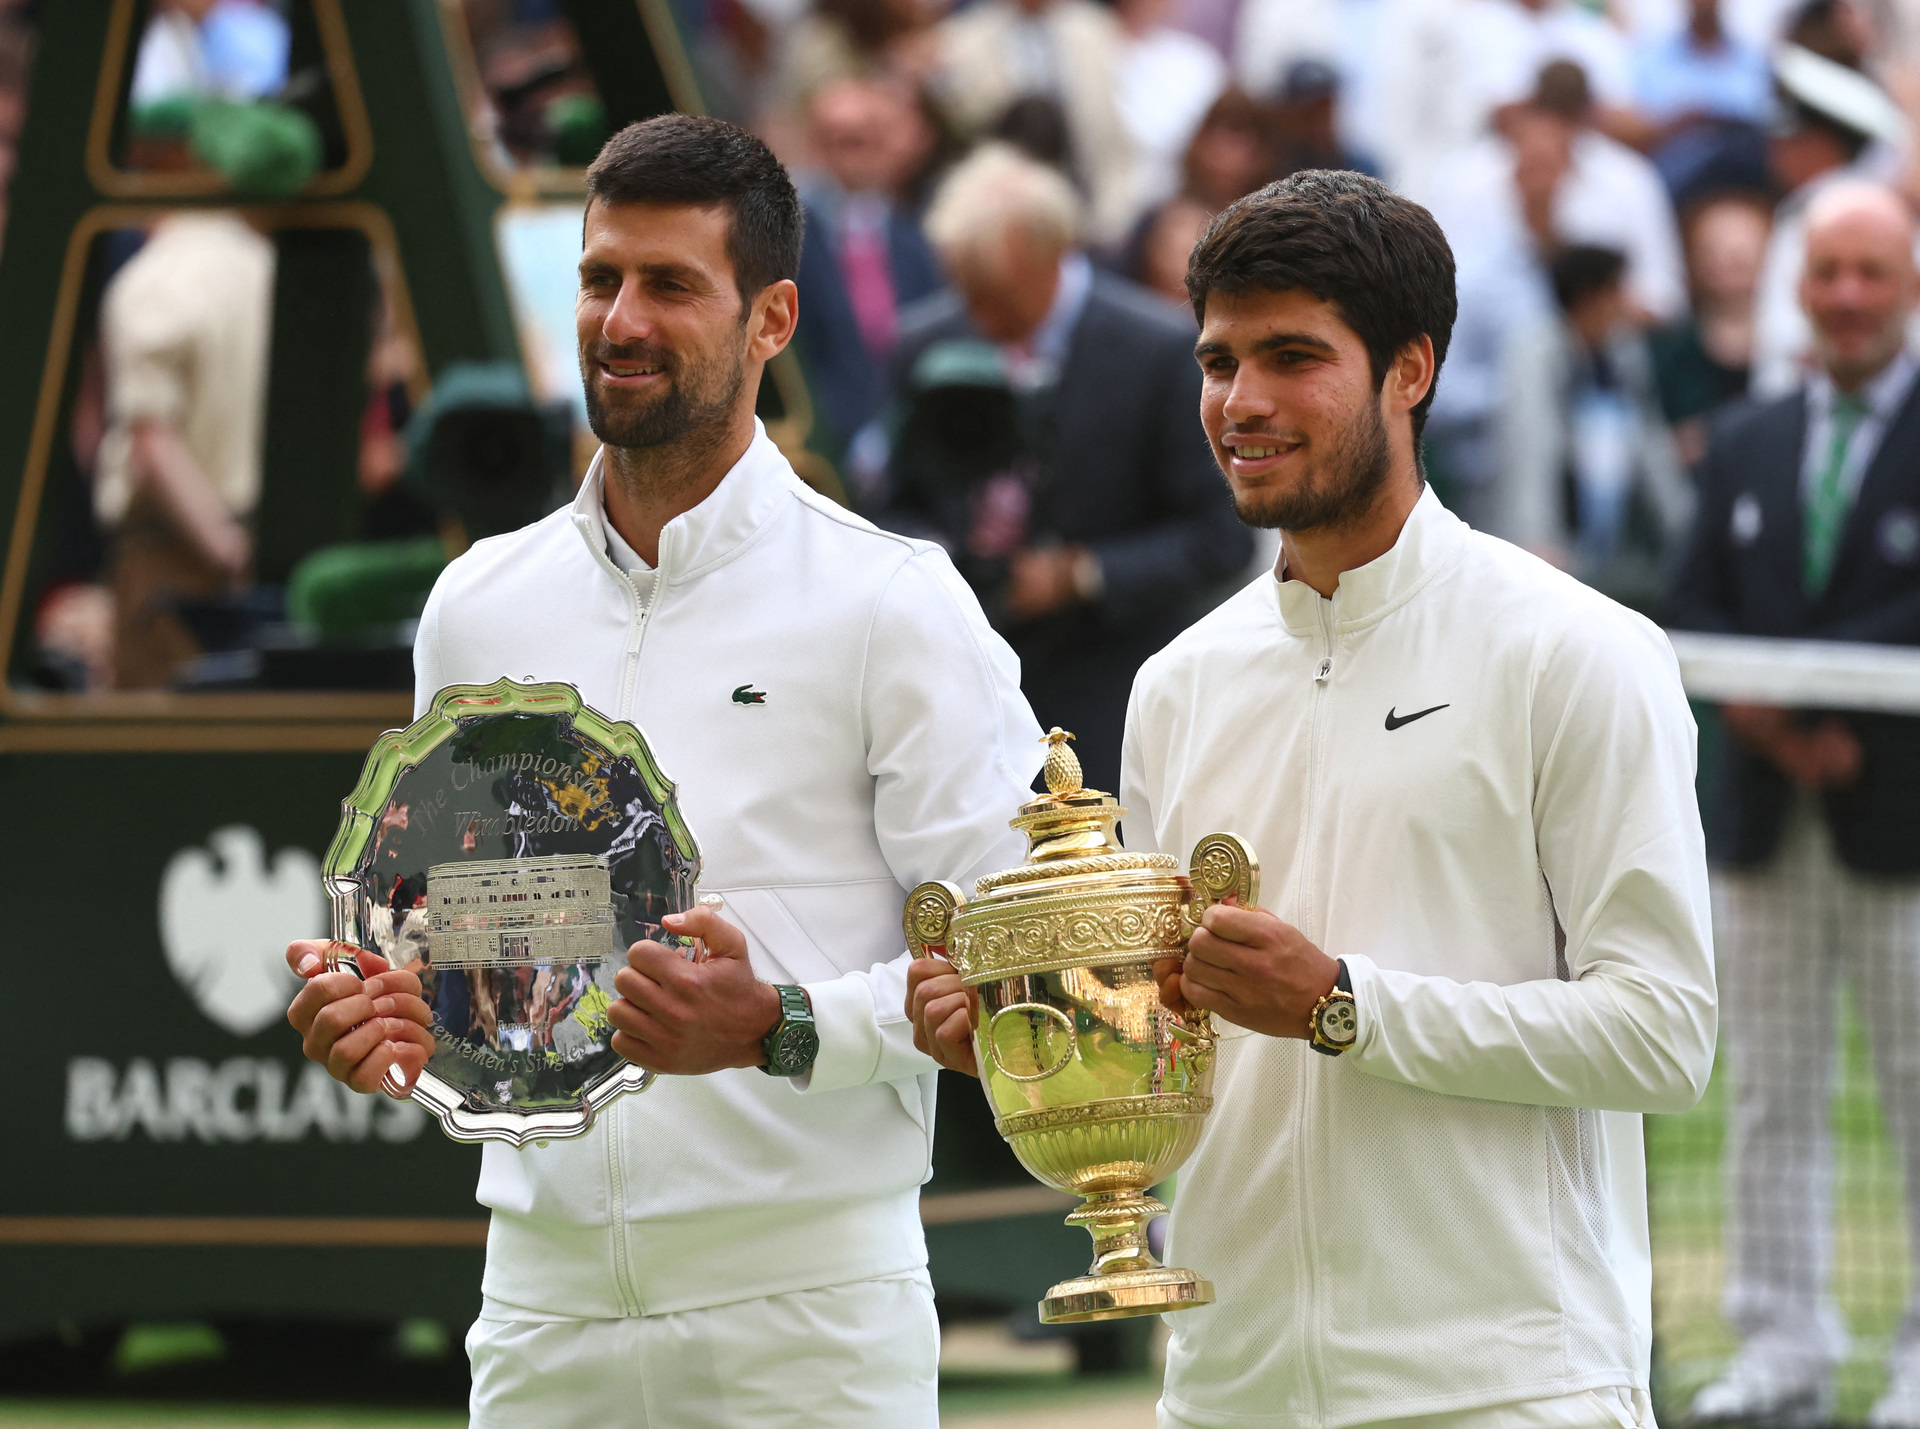 Tennis - Wimbledon - All England Lawn Tennis & Croquet Club, London, UK - JULY 16, 2023 Spaniard Carlos Alcaraz poses with the trophy after winning his final match along with Serbian runner-up Novak Djokovic REUTERS/Toby Melville